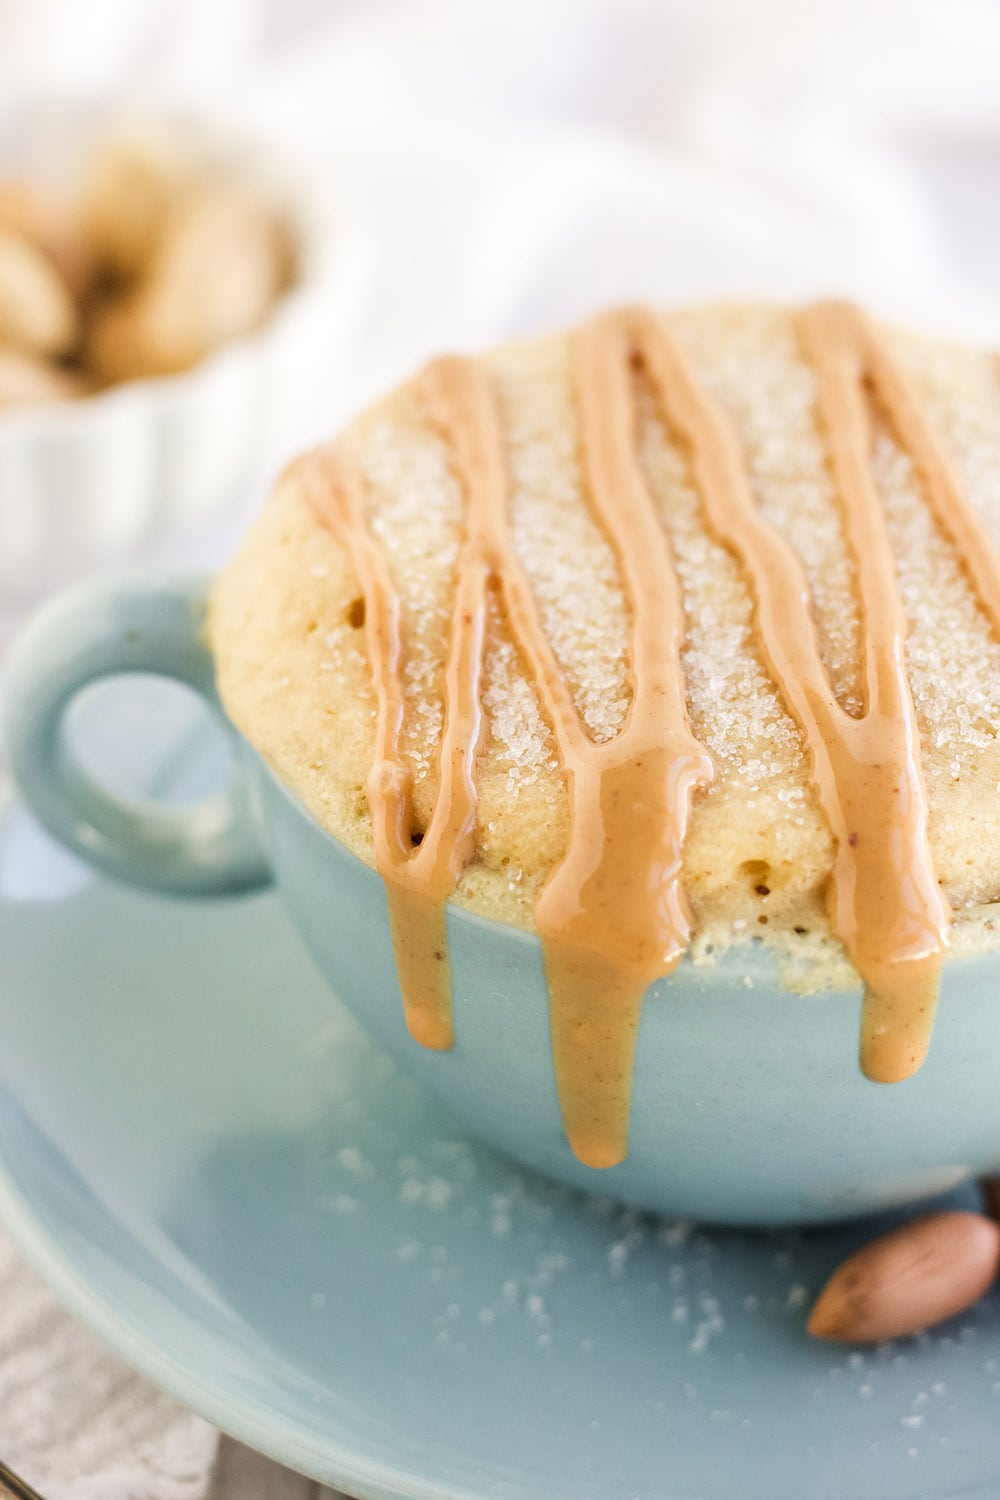 Peanut butter cake with drizzles in a blue mug by peanuts.